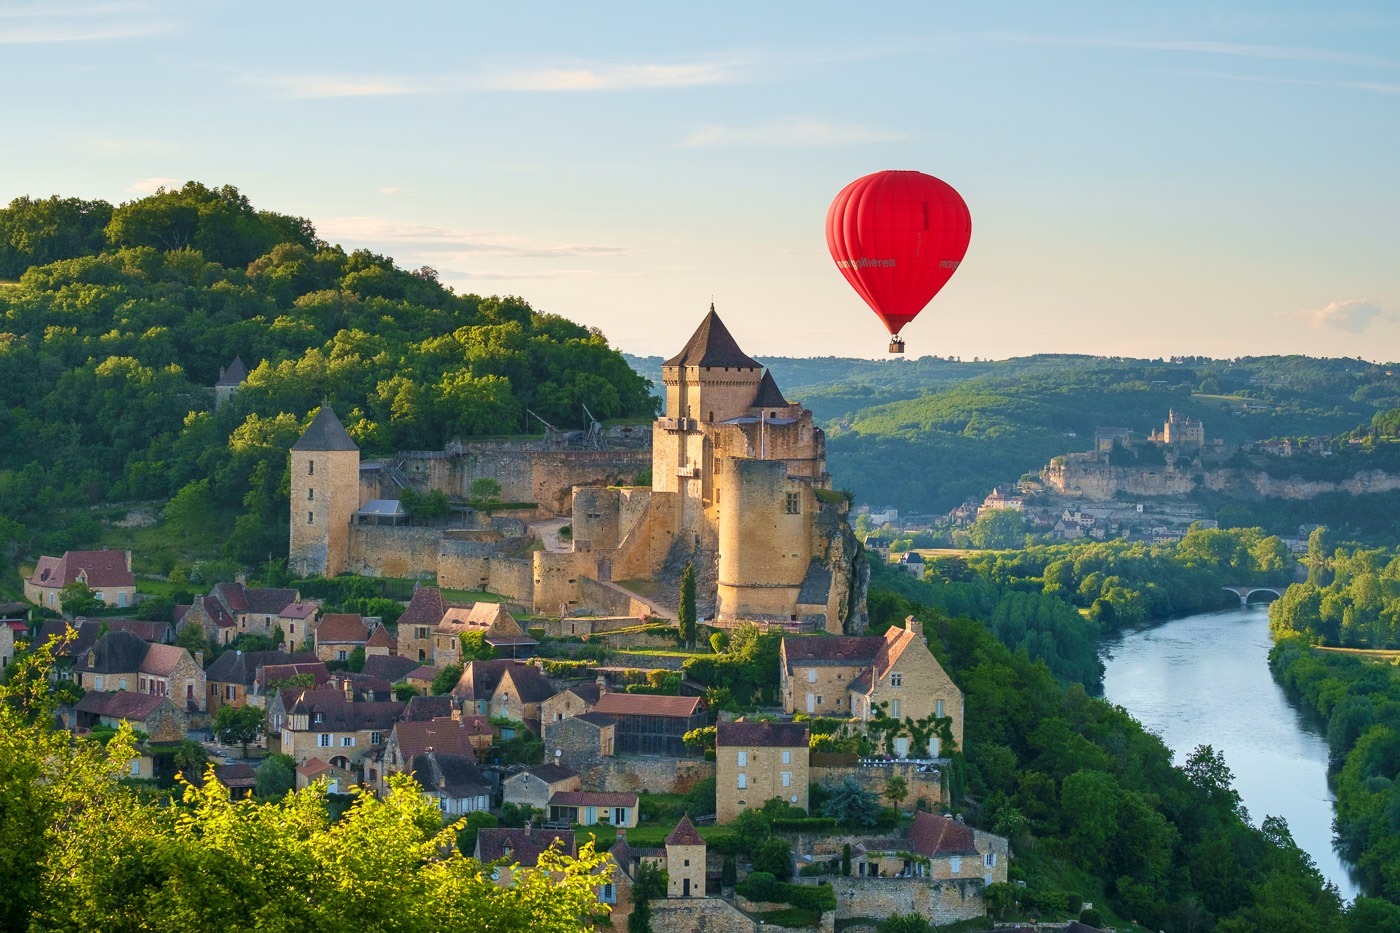 Hot-air balloon over Chateau de Castelnaud castle and Dordogne River valley in late afternoon